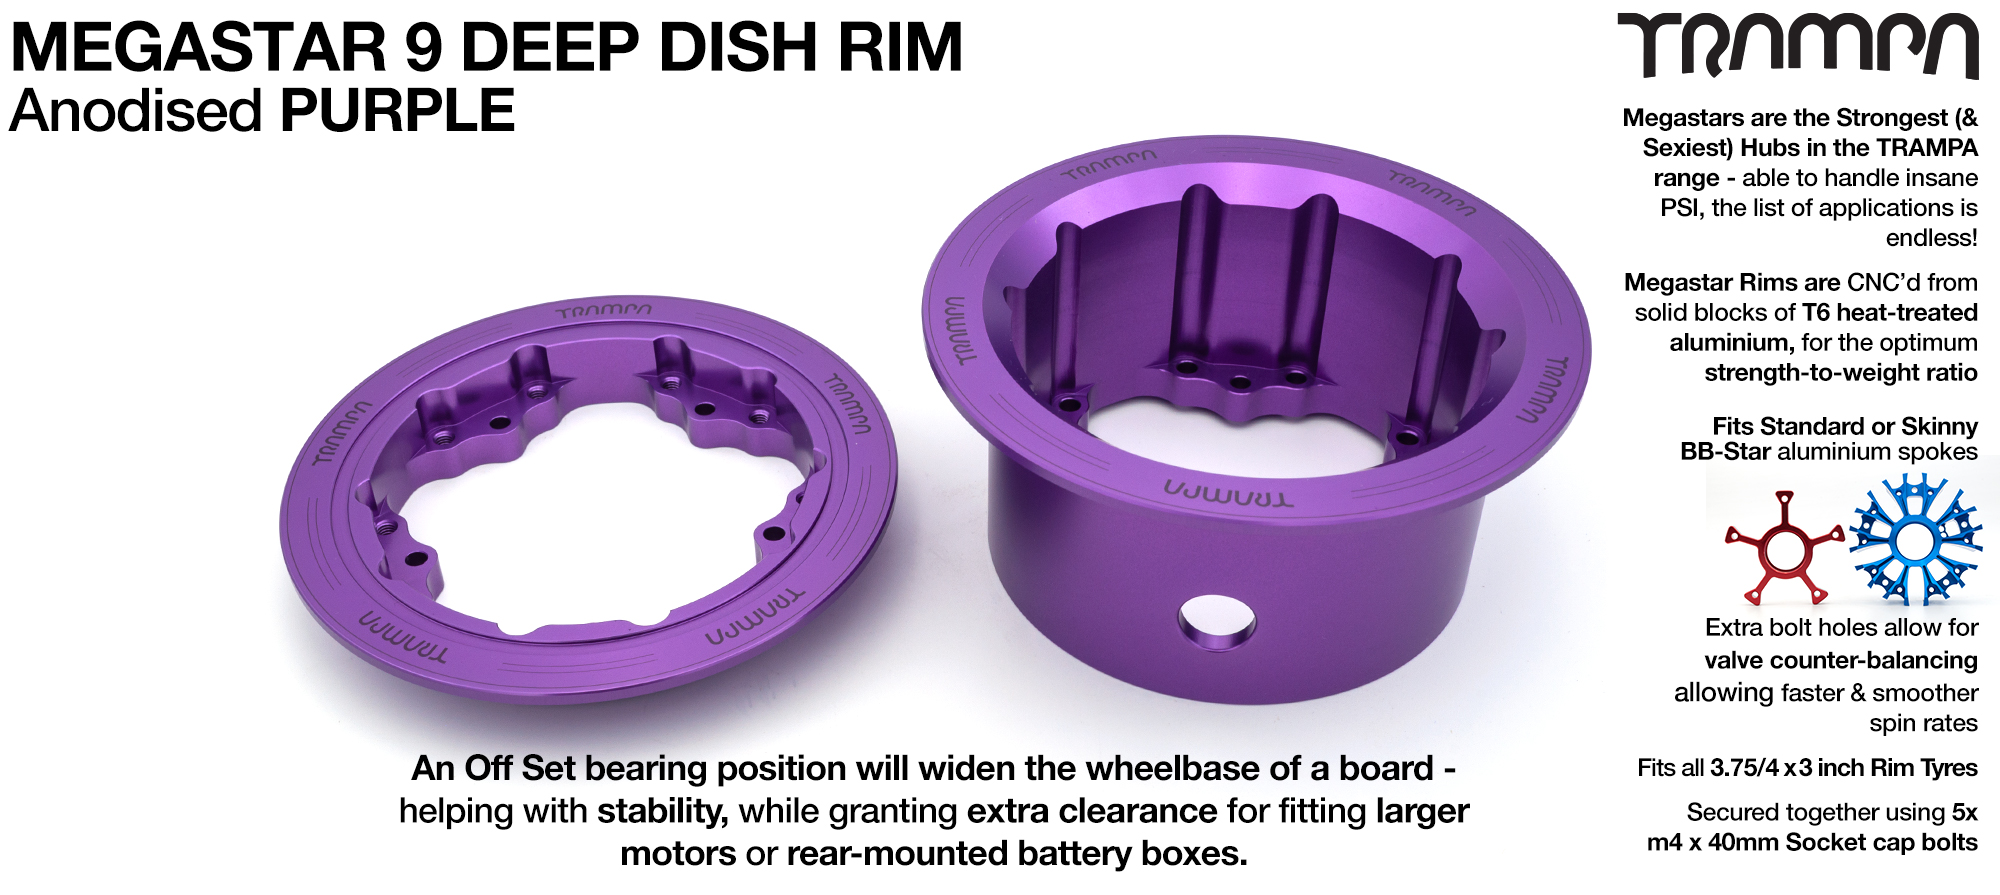 MEGASTAR 9 DEEP-DISH Rims Measure 3.75/4x 3 Inch. The Bearings are positioned OFF-SET & accept 4 Inch Rim Tyres to make 9 or 10 inch Wheels - PURPLE